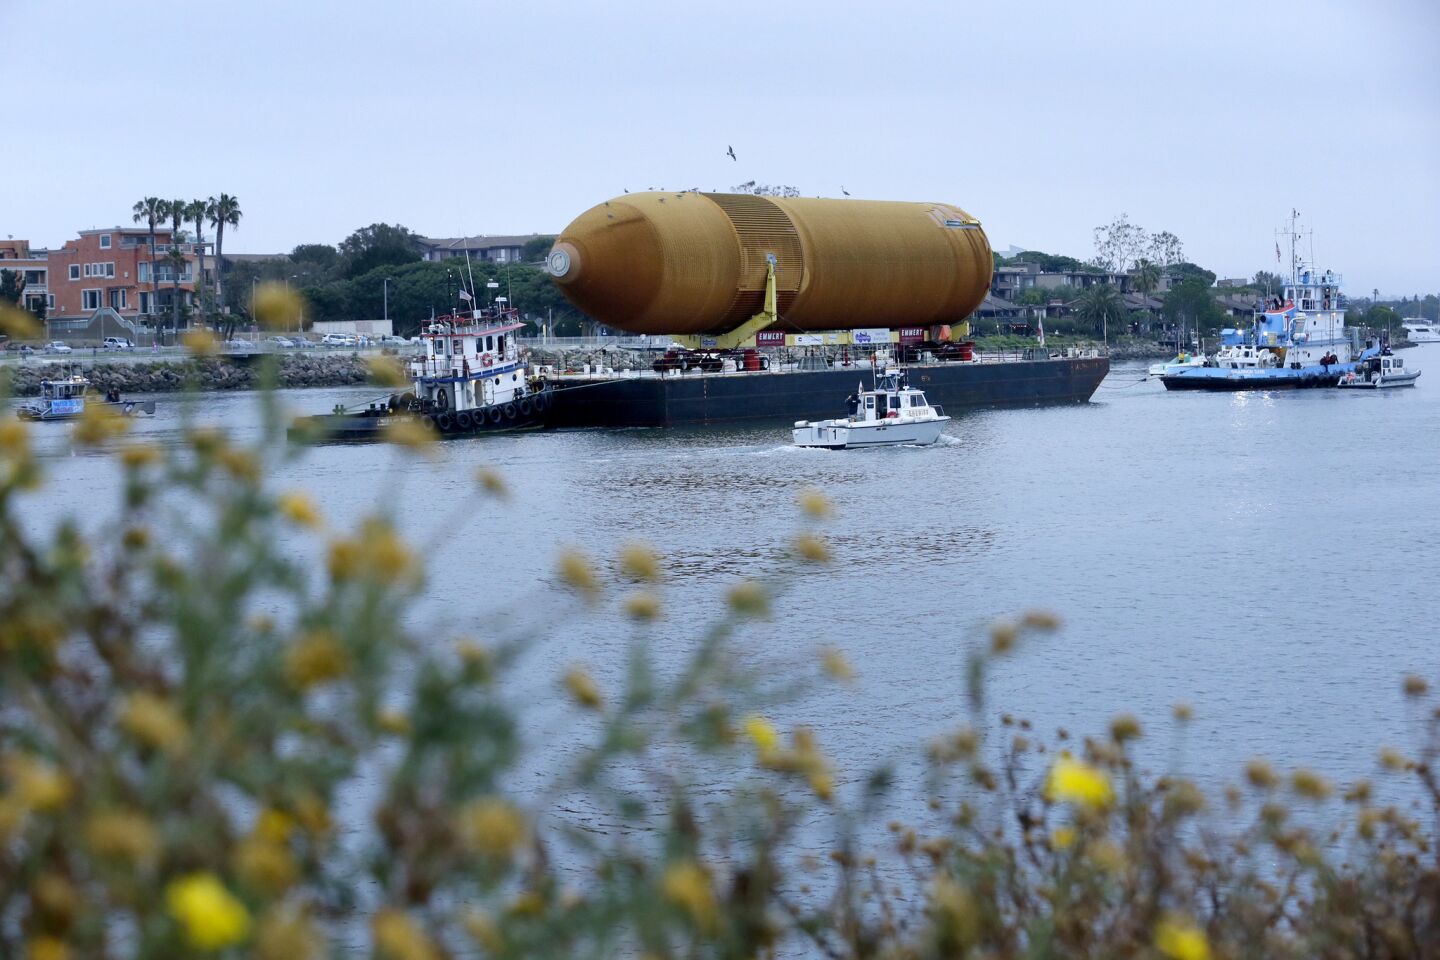 The space shuttle external fuel tank ET-94 arrives in Marina del Rey, on its way to the California Science Center.